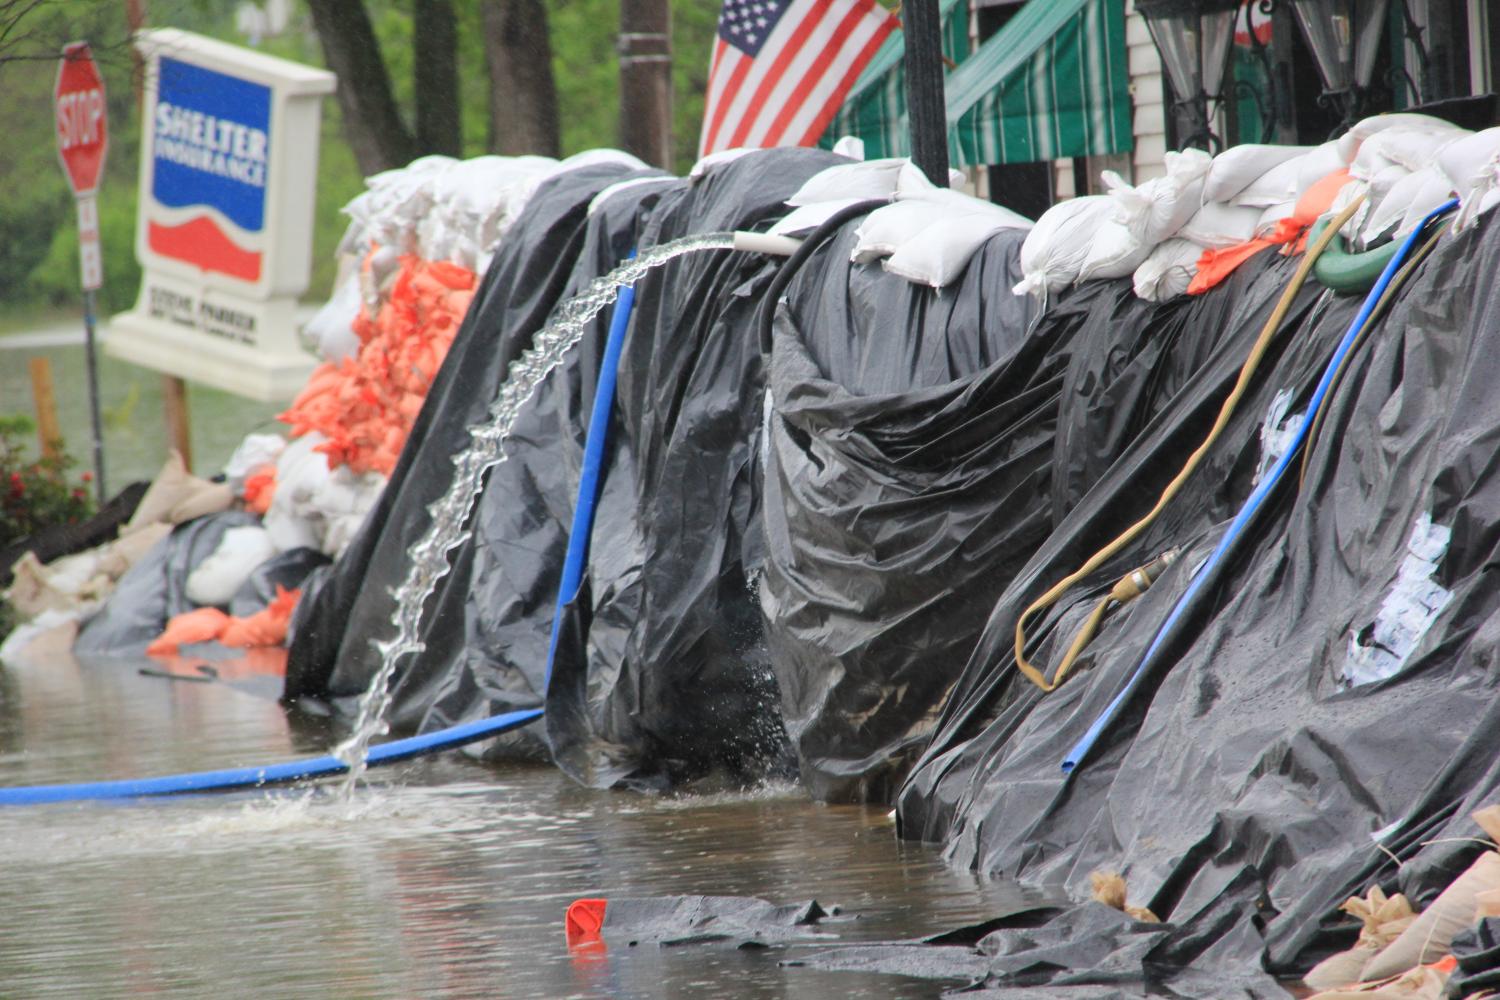 A hose is used to pump water away from stores over a wall of sandbags. This process is used to remove any water that may have made its way past the sandbags.